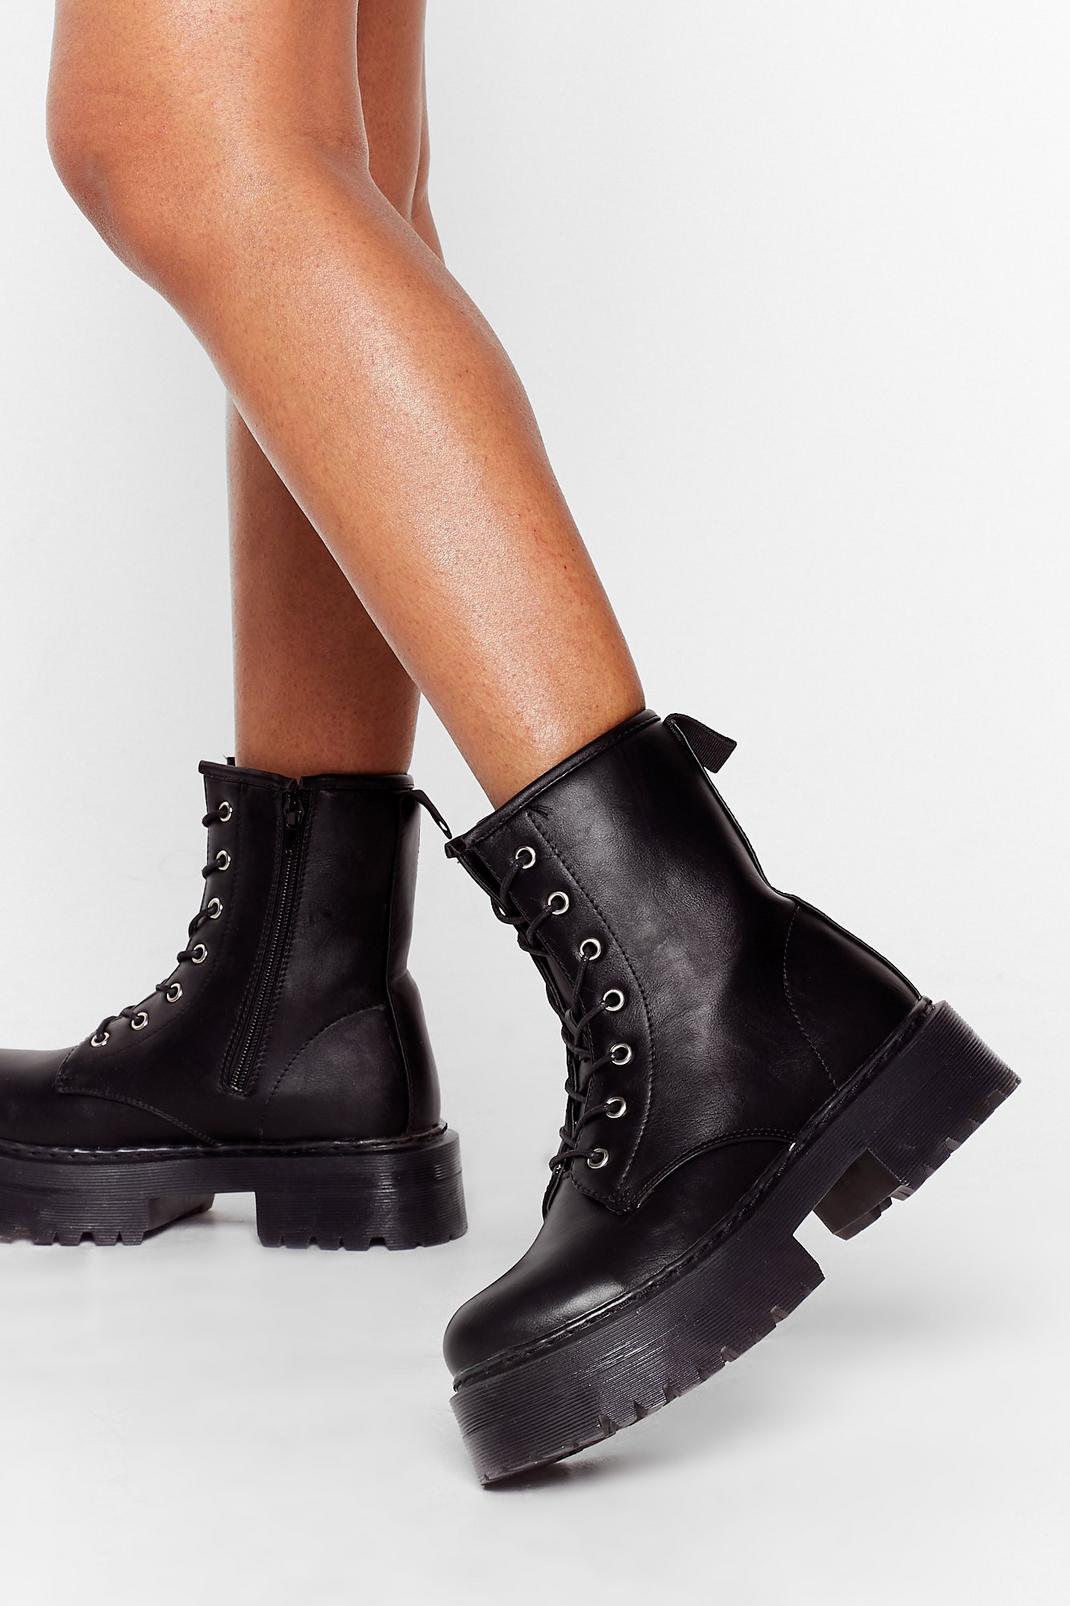 Hit the Road Lace-Up Platform Boots | Nasty Gal